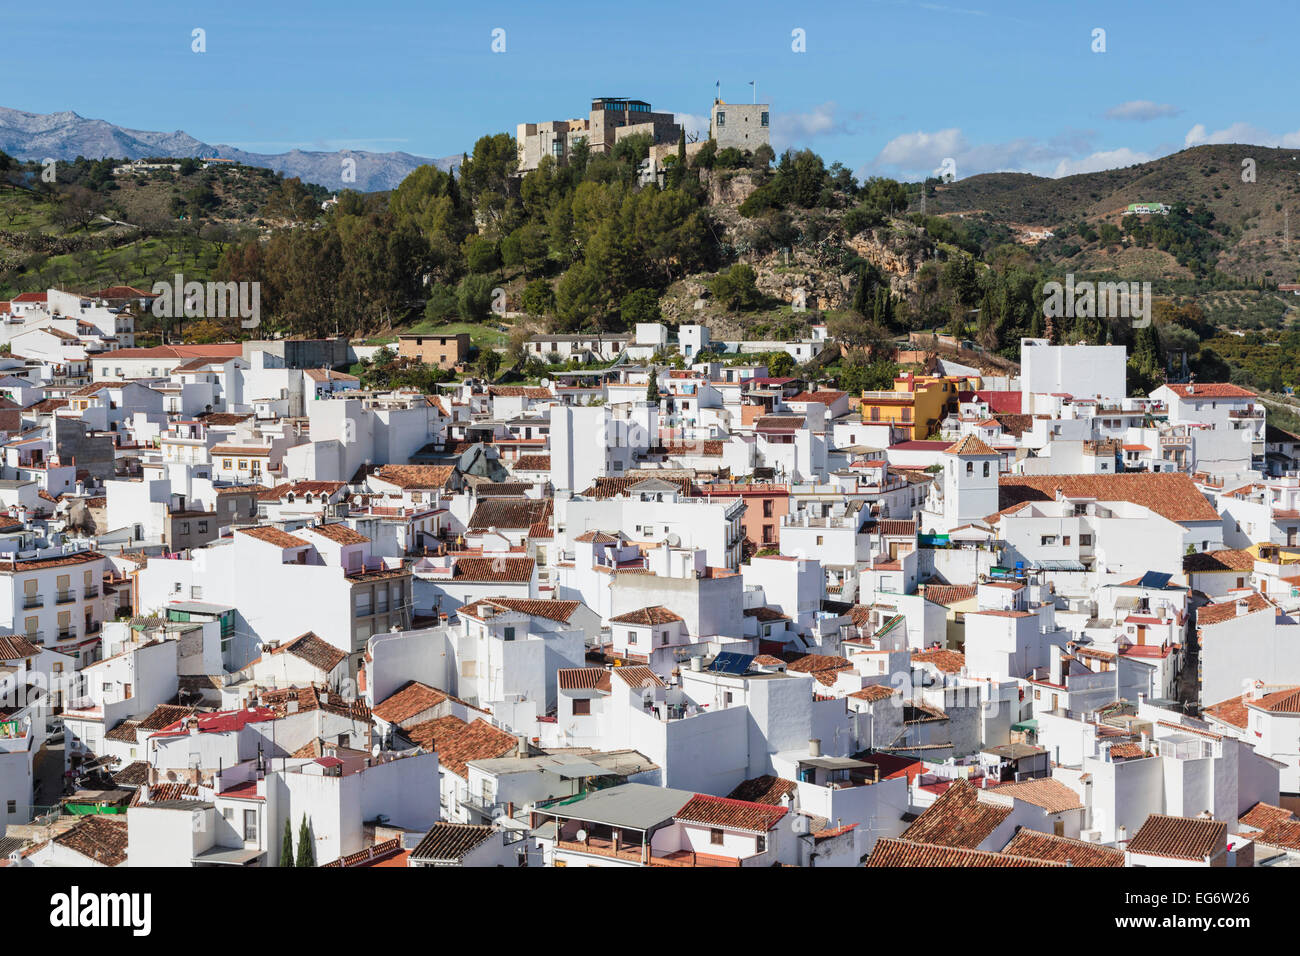 Monda, Malaga Province, Andalusia, southern Spain. Typical white-washed Spanish town. Stock Photo